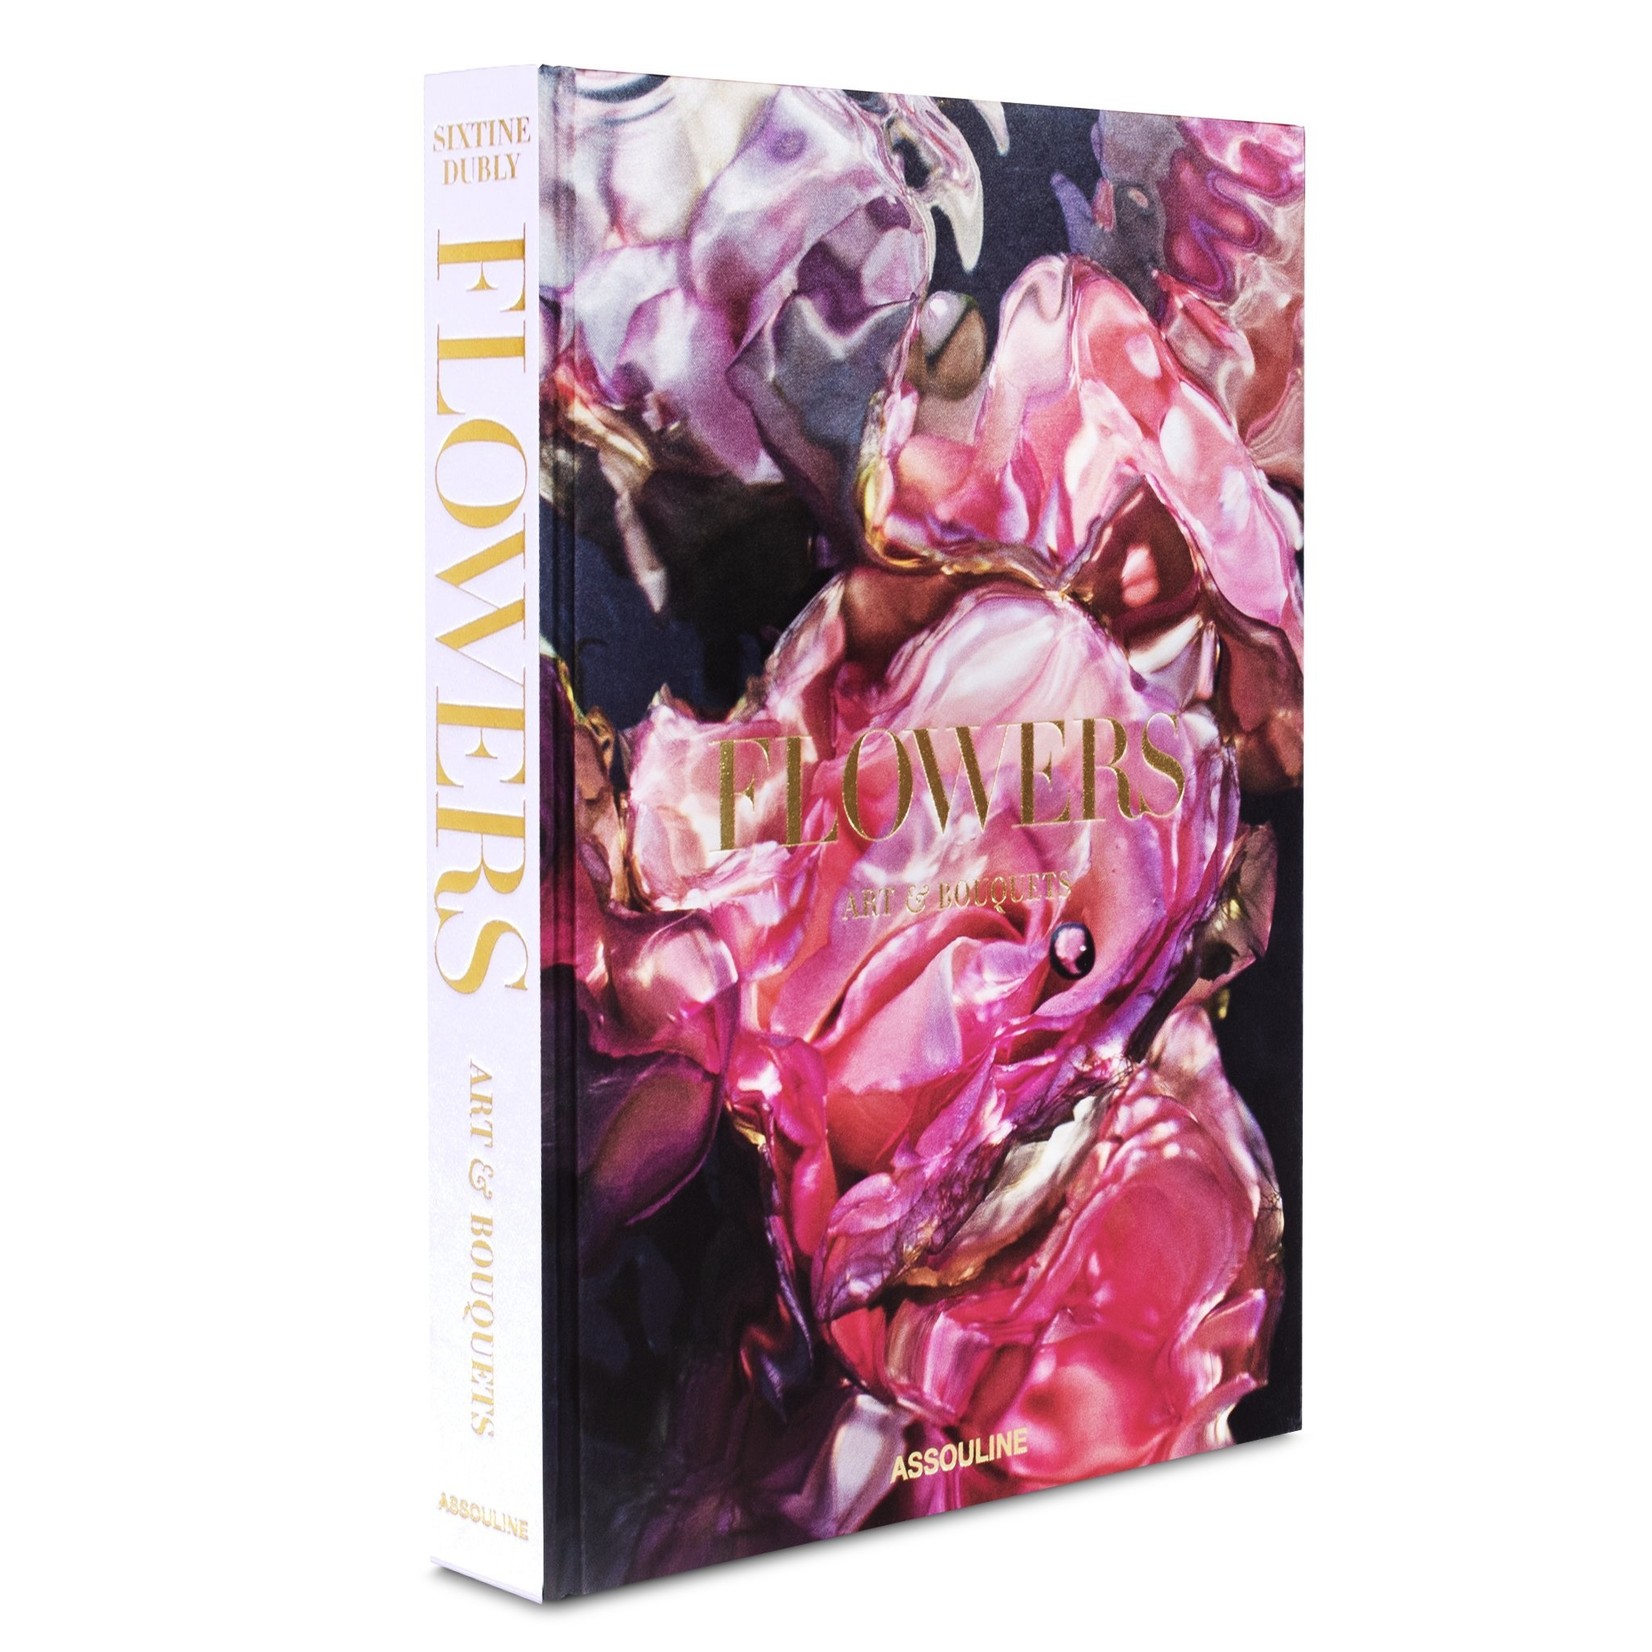 Assouline Flowers: Art and Bouquets